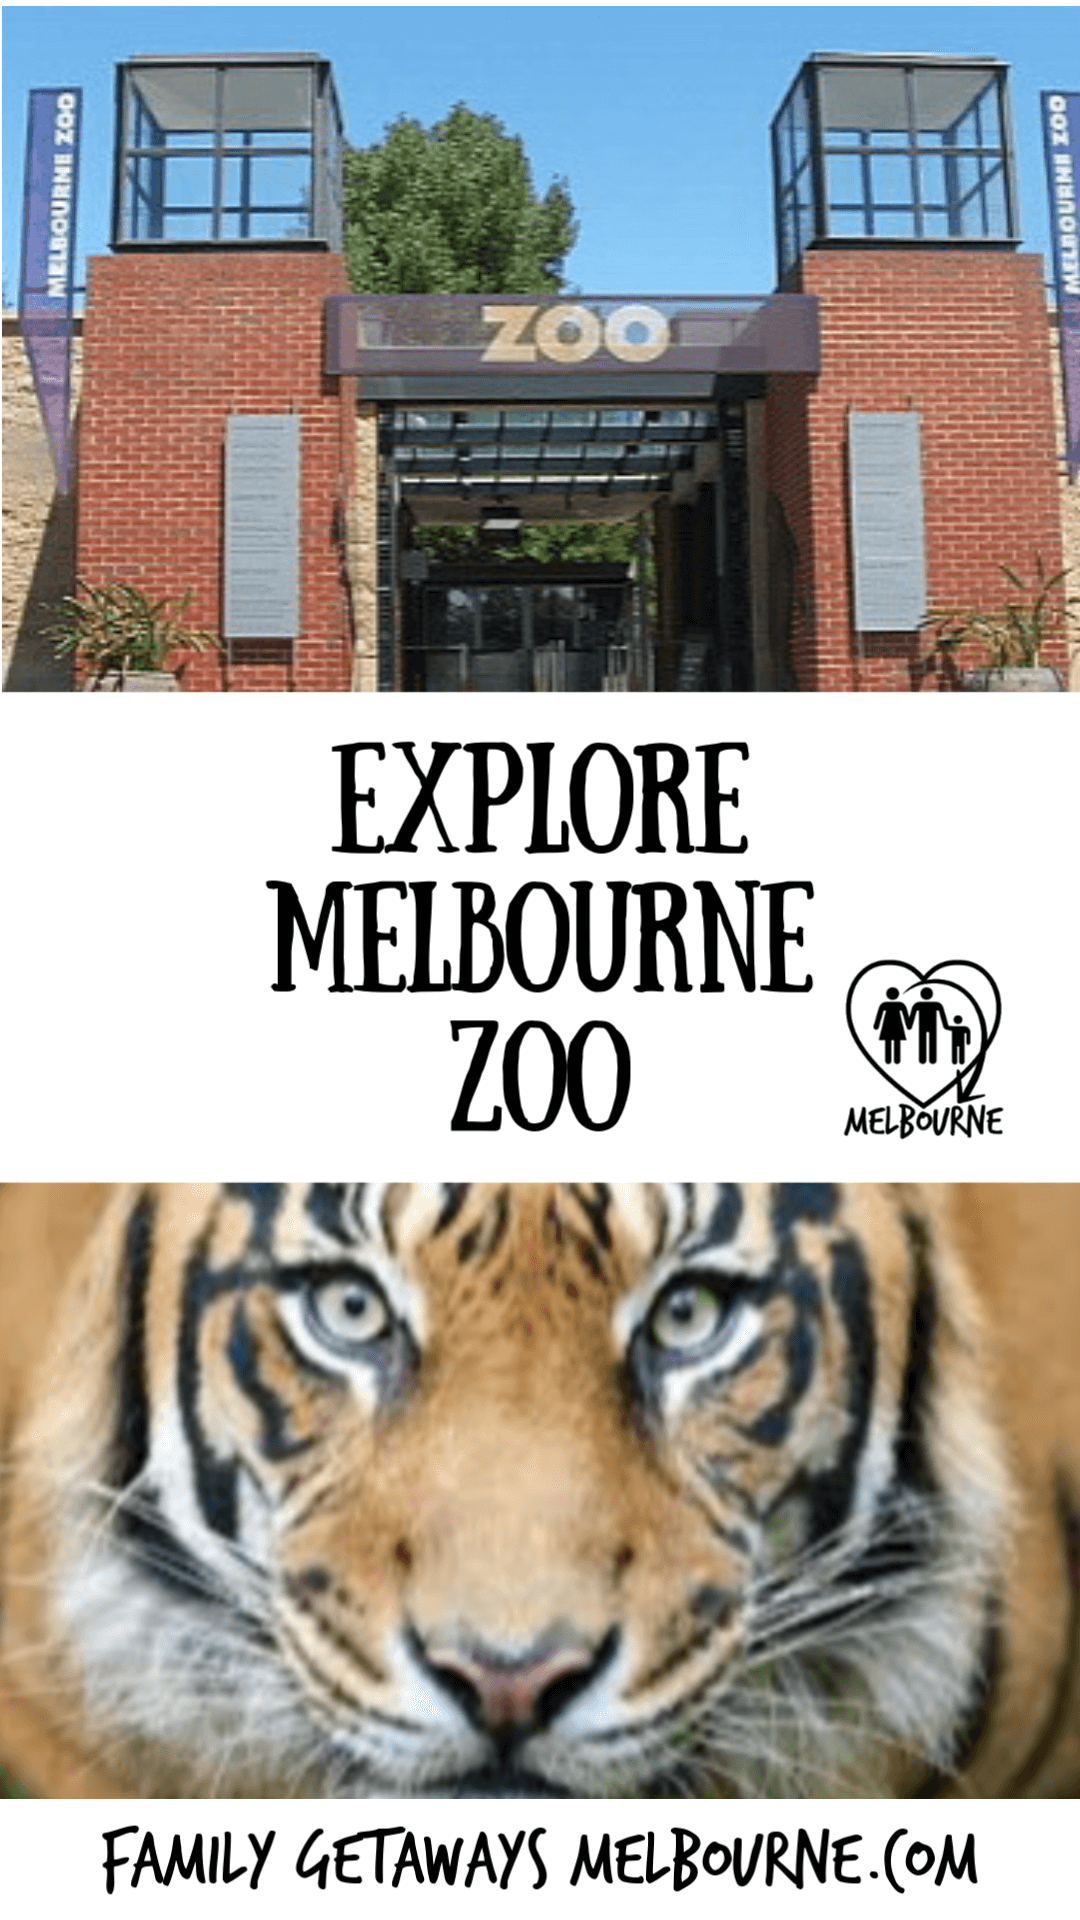 The Melbourne Zoo in the heart of the city